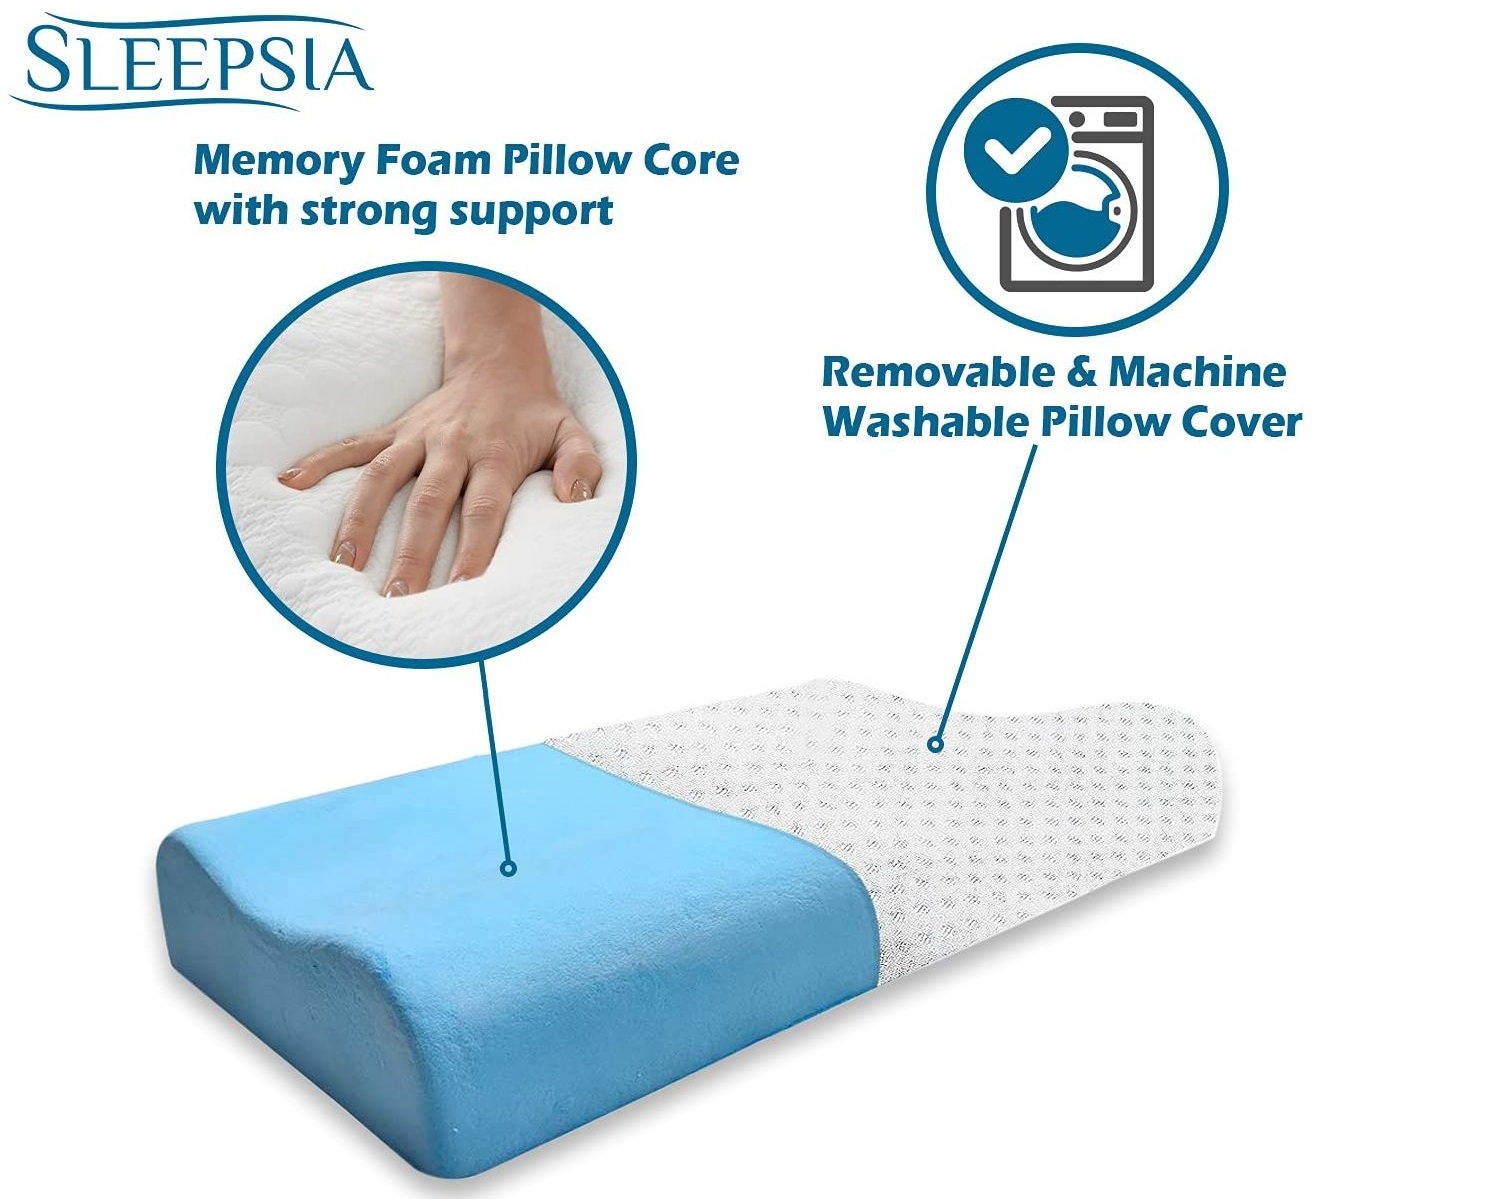 Best Memory Foam Pillow in India for You